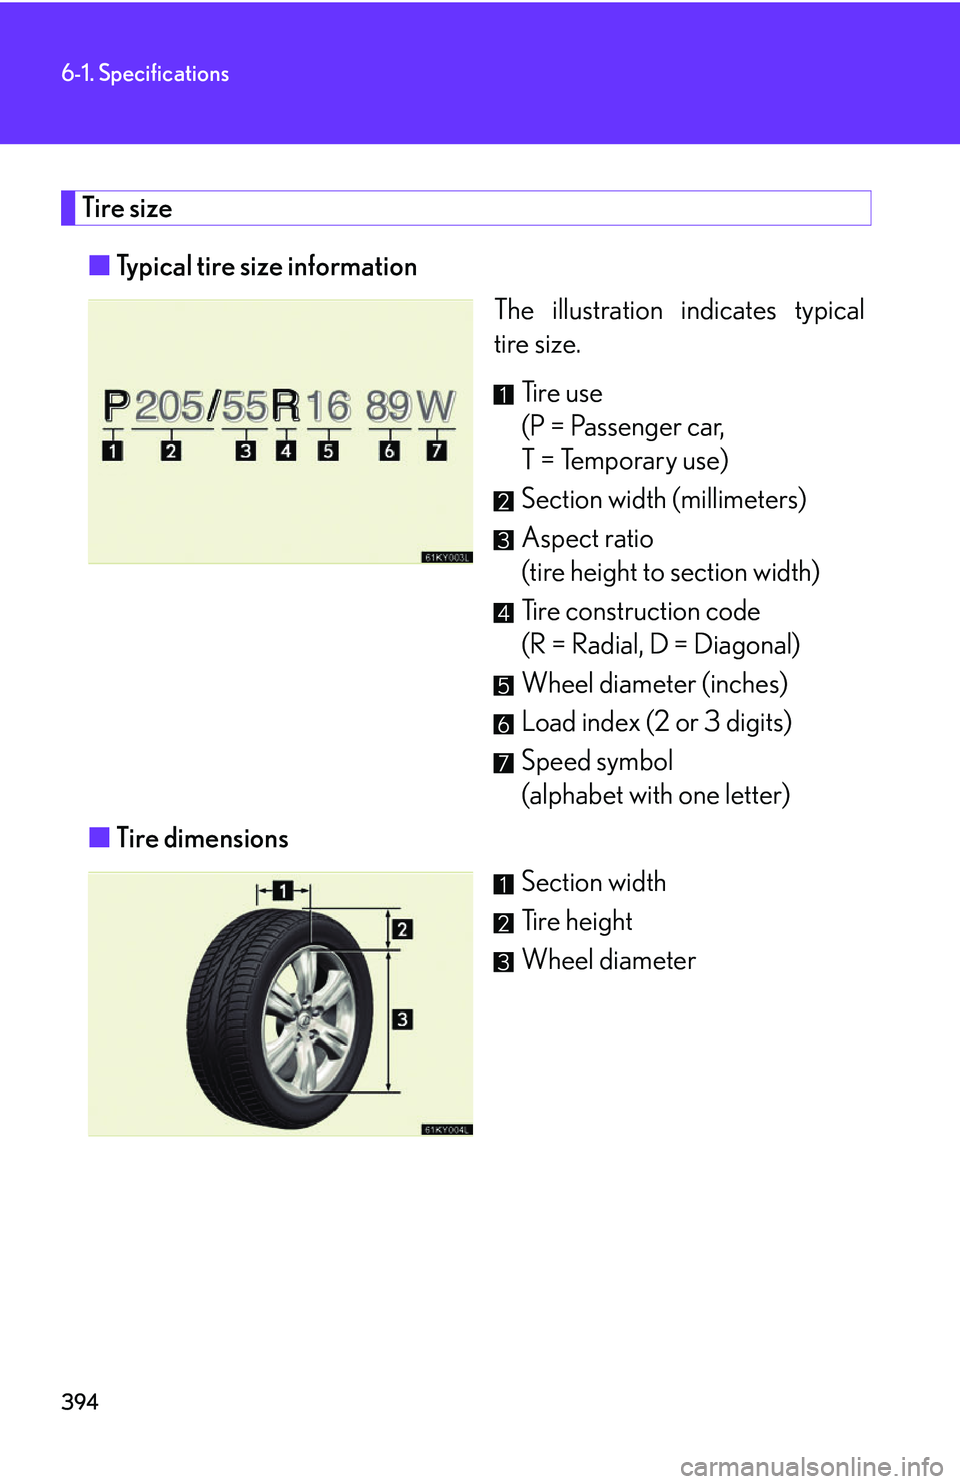 Lexus IS350 2006  Scheduled Maintenance Guide / LEXUS 2006 IS350/250 FROM MAY 2006 PROD. OWNERS MANUAL (OM53619U) 394
6-1. Specifications
Tire size■ Typical tire size information
The illustration indicates typical
tire size.
Ti r e  u s e
(P = Passenger car, 
T = Temporary use)
Section width (millimeters)
Aspec